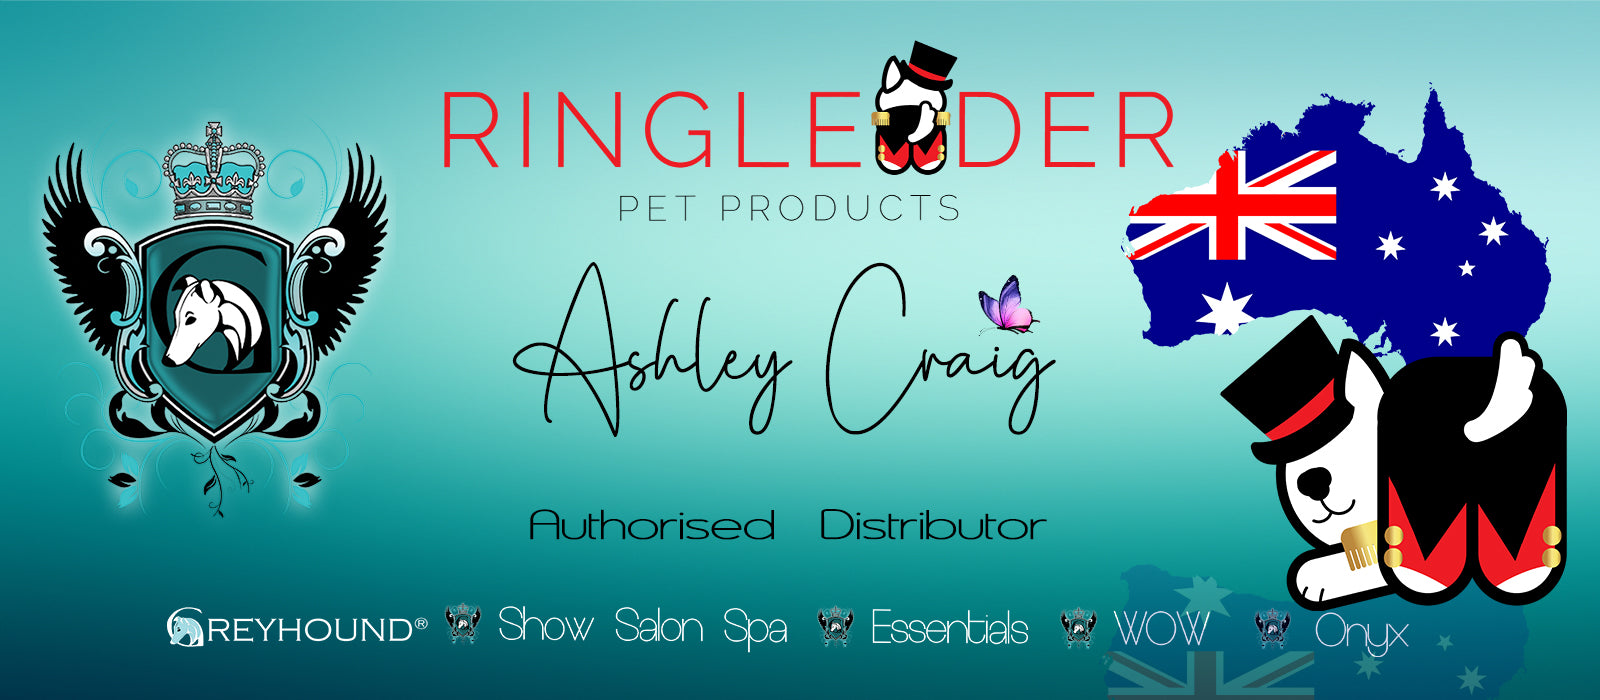 Ringleader Pet Products - Providing grooming products, toys, apparel and more for pet lovers in Australia